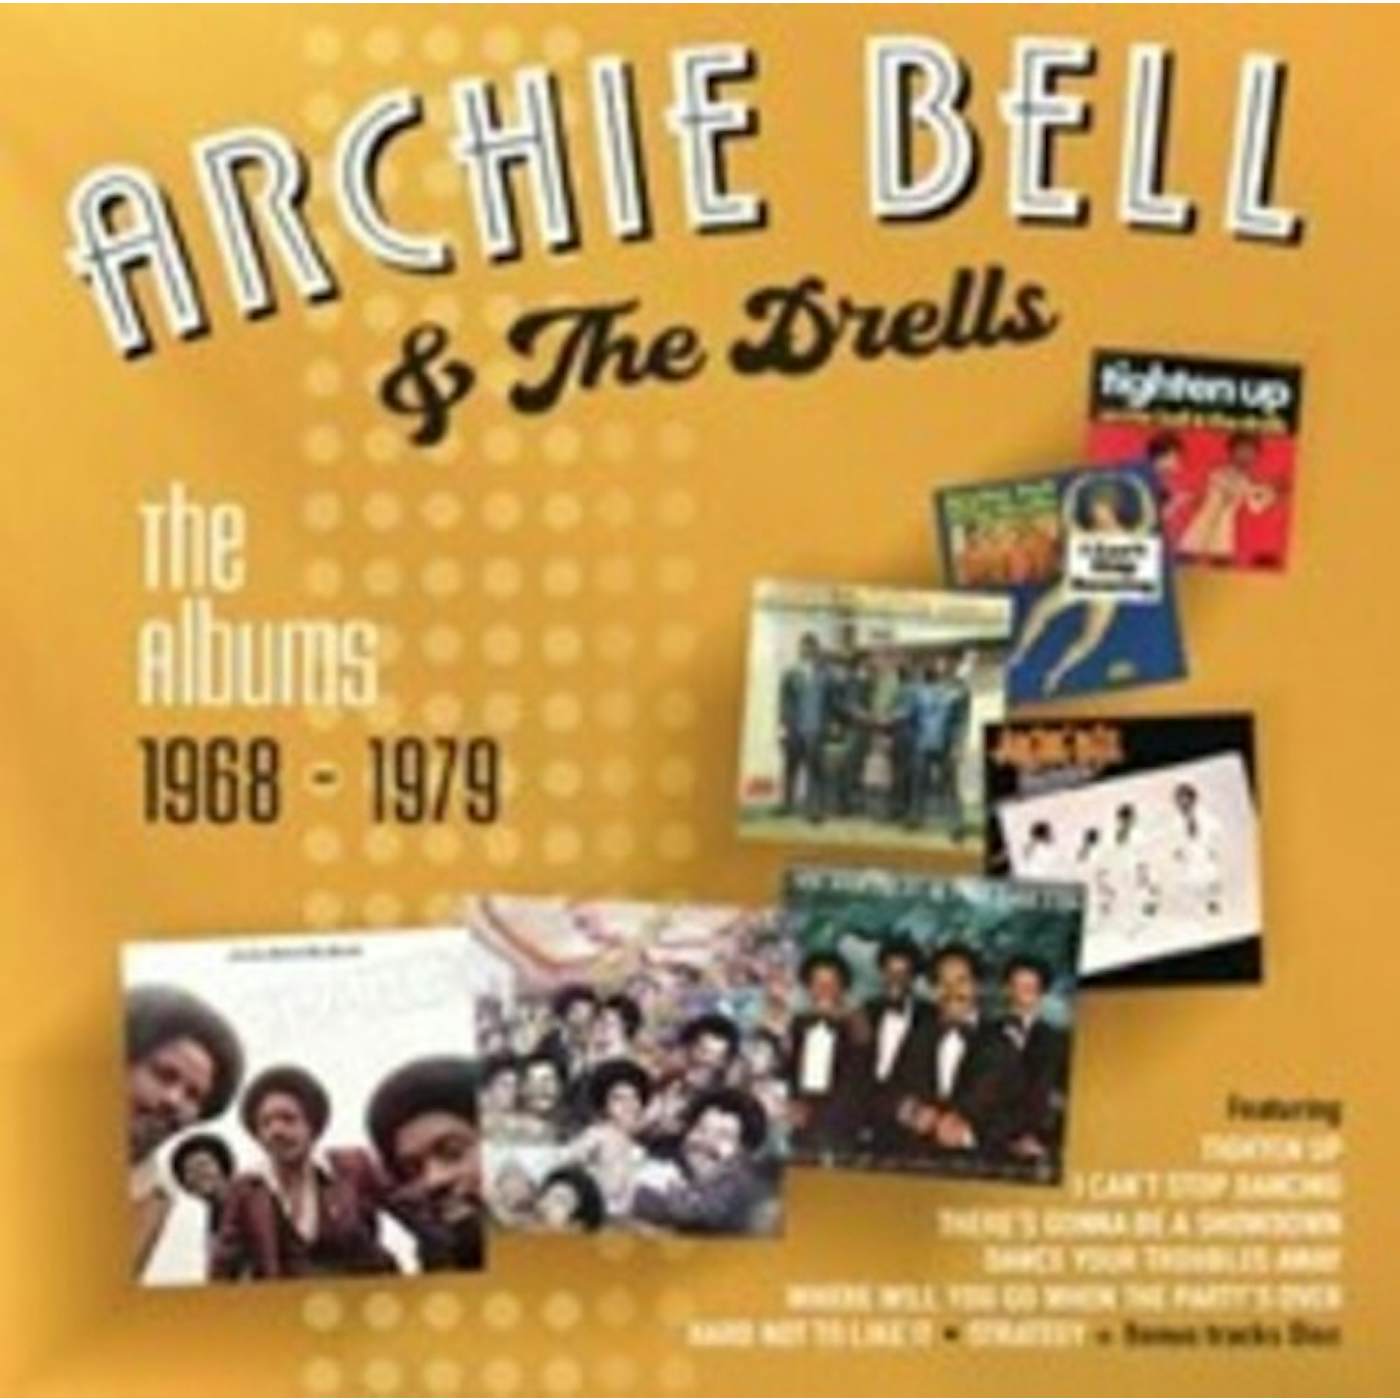 Archie Bell & The Drells ALBUMS 1968-1979 CD